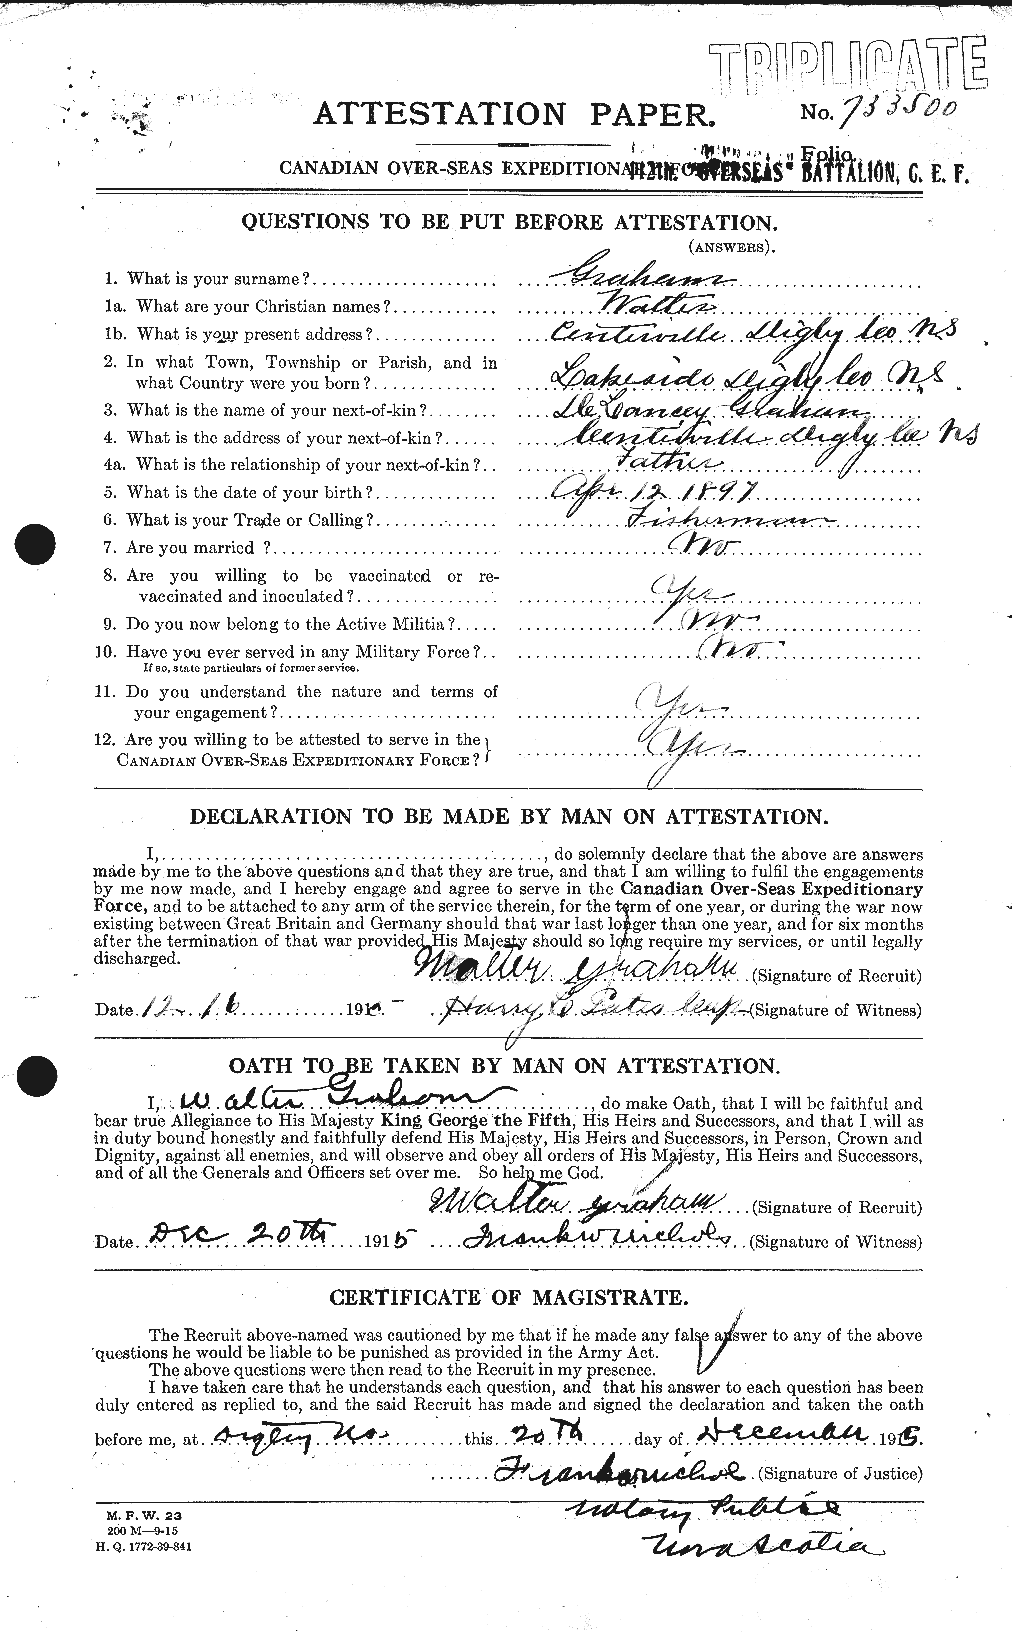 Personnel Records of the First World War - CEF 362650a